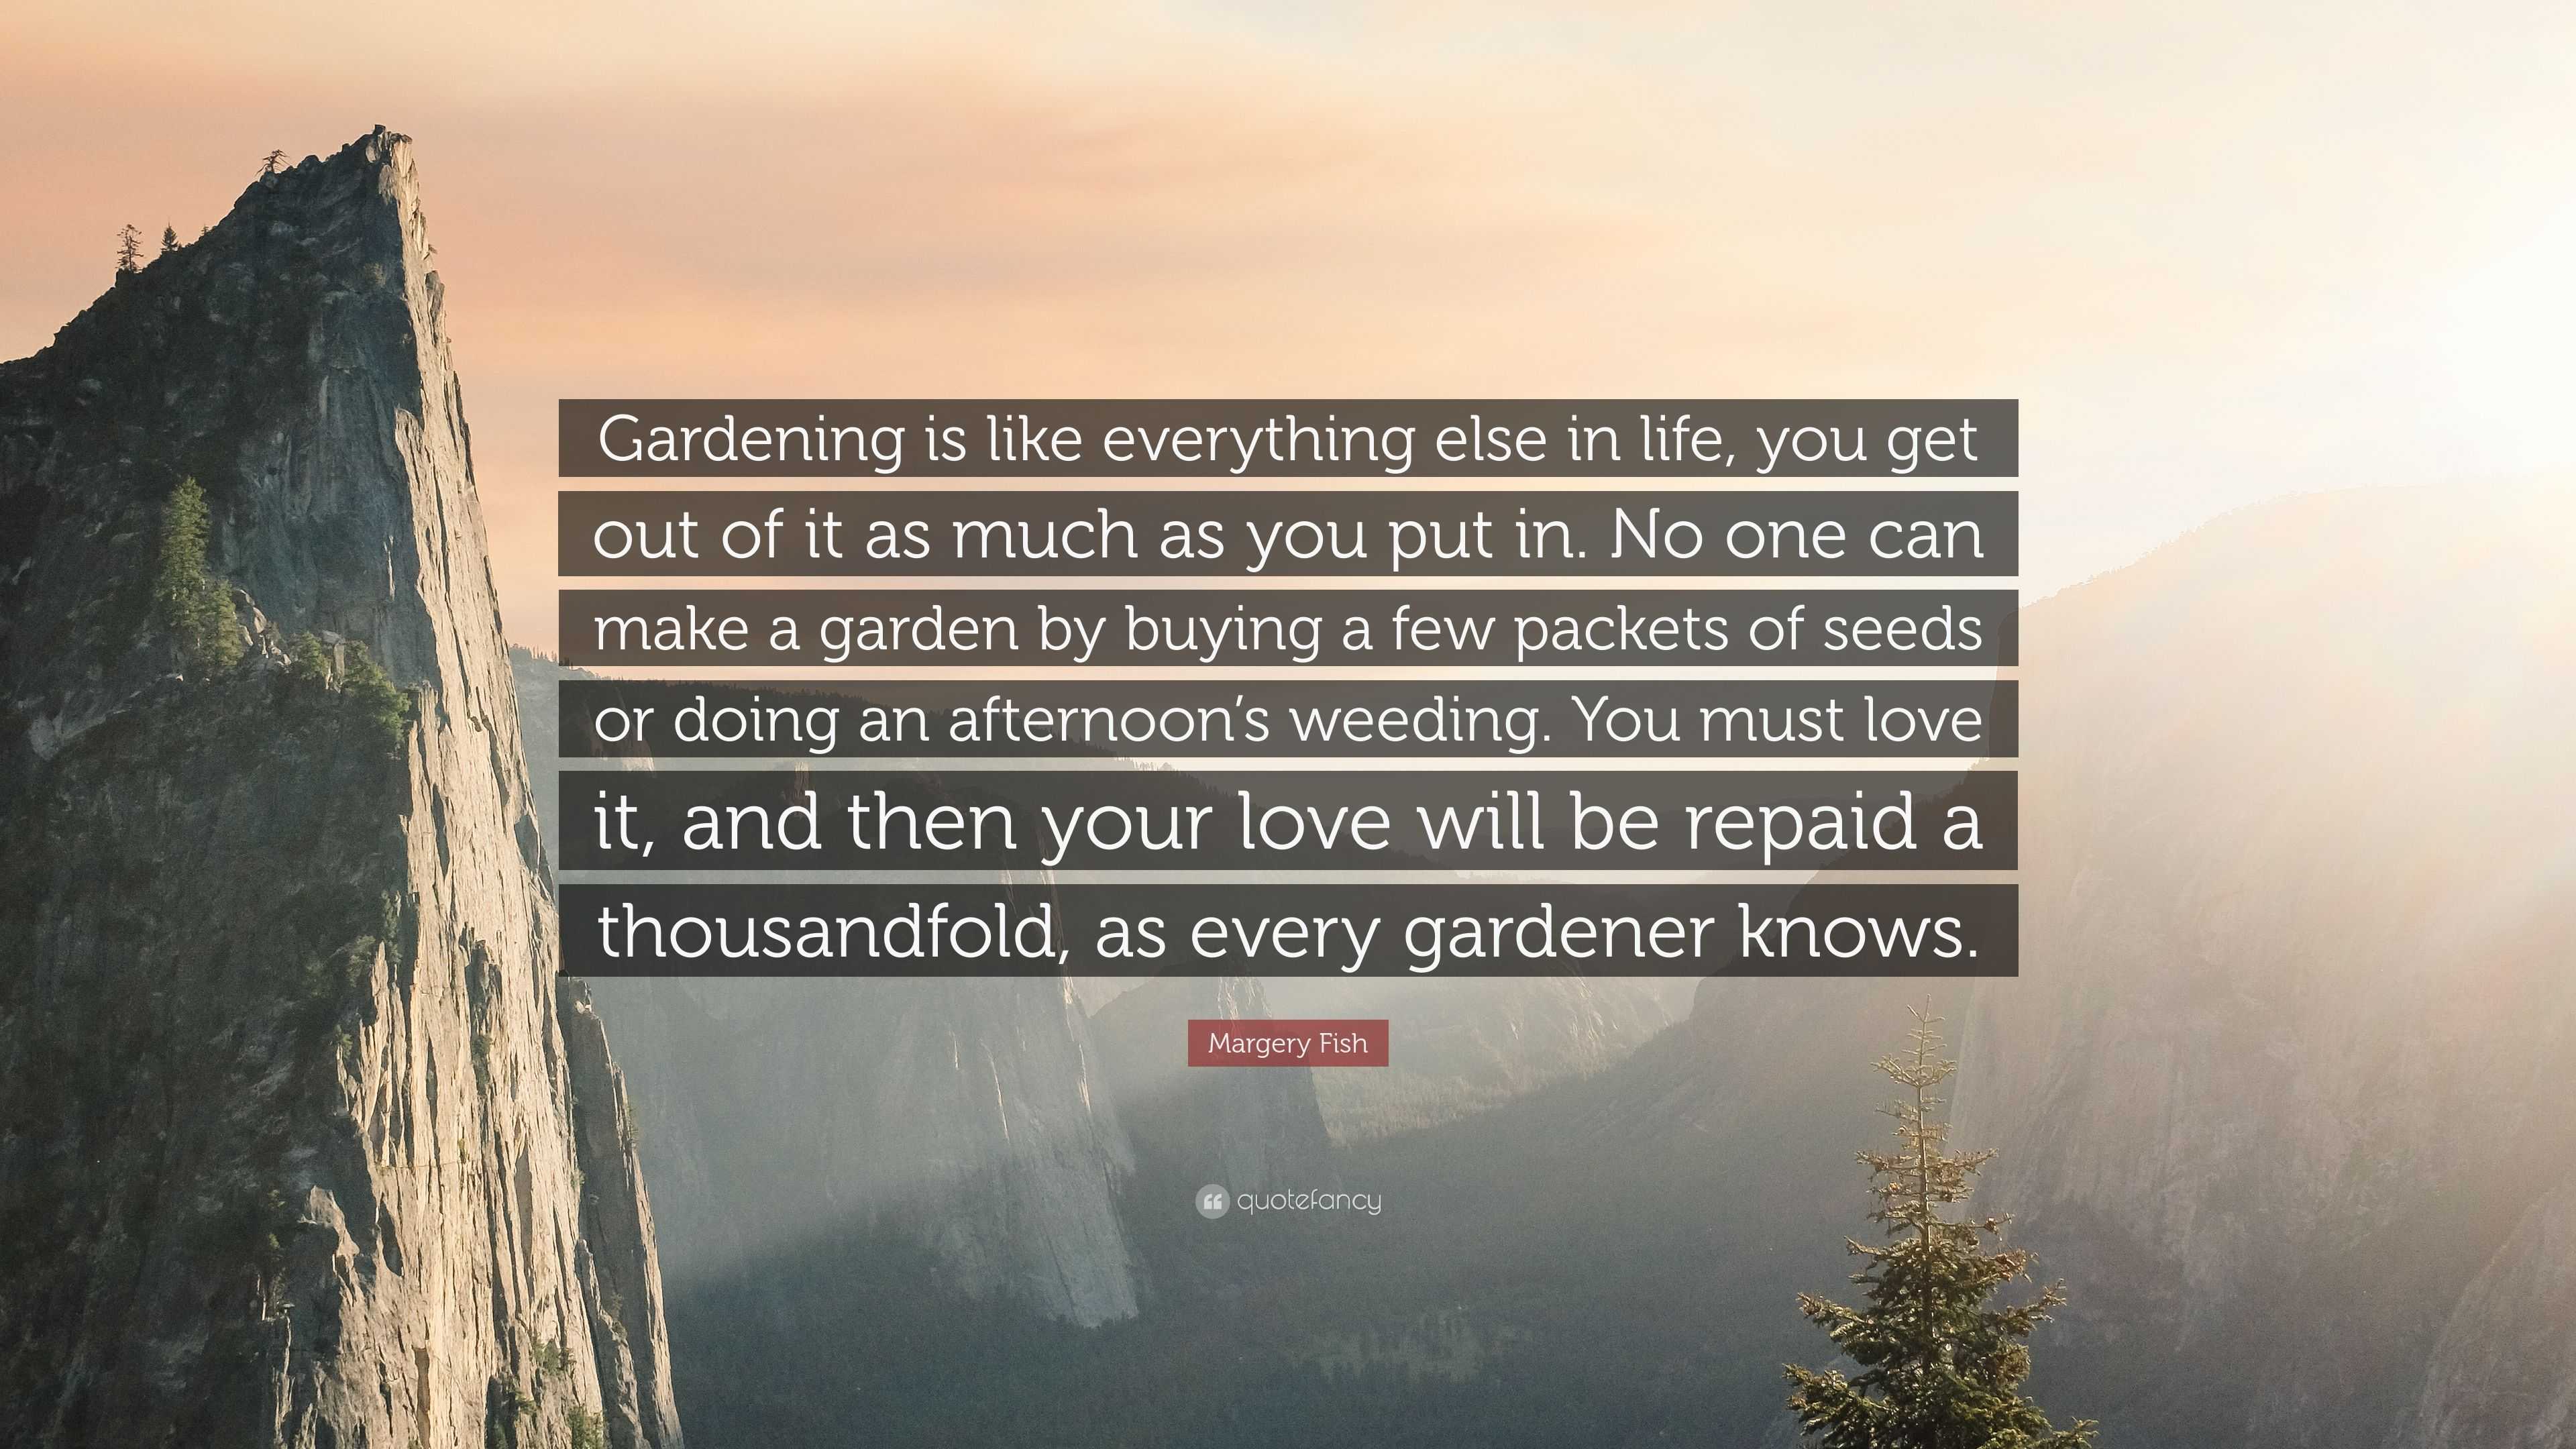 Margery Fish Quote “Gardening is like everything else in life you out